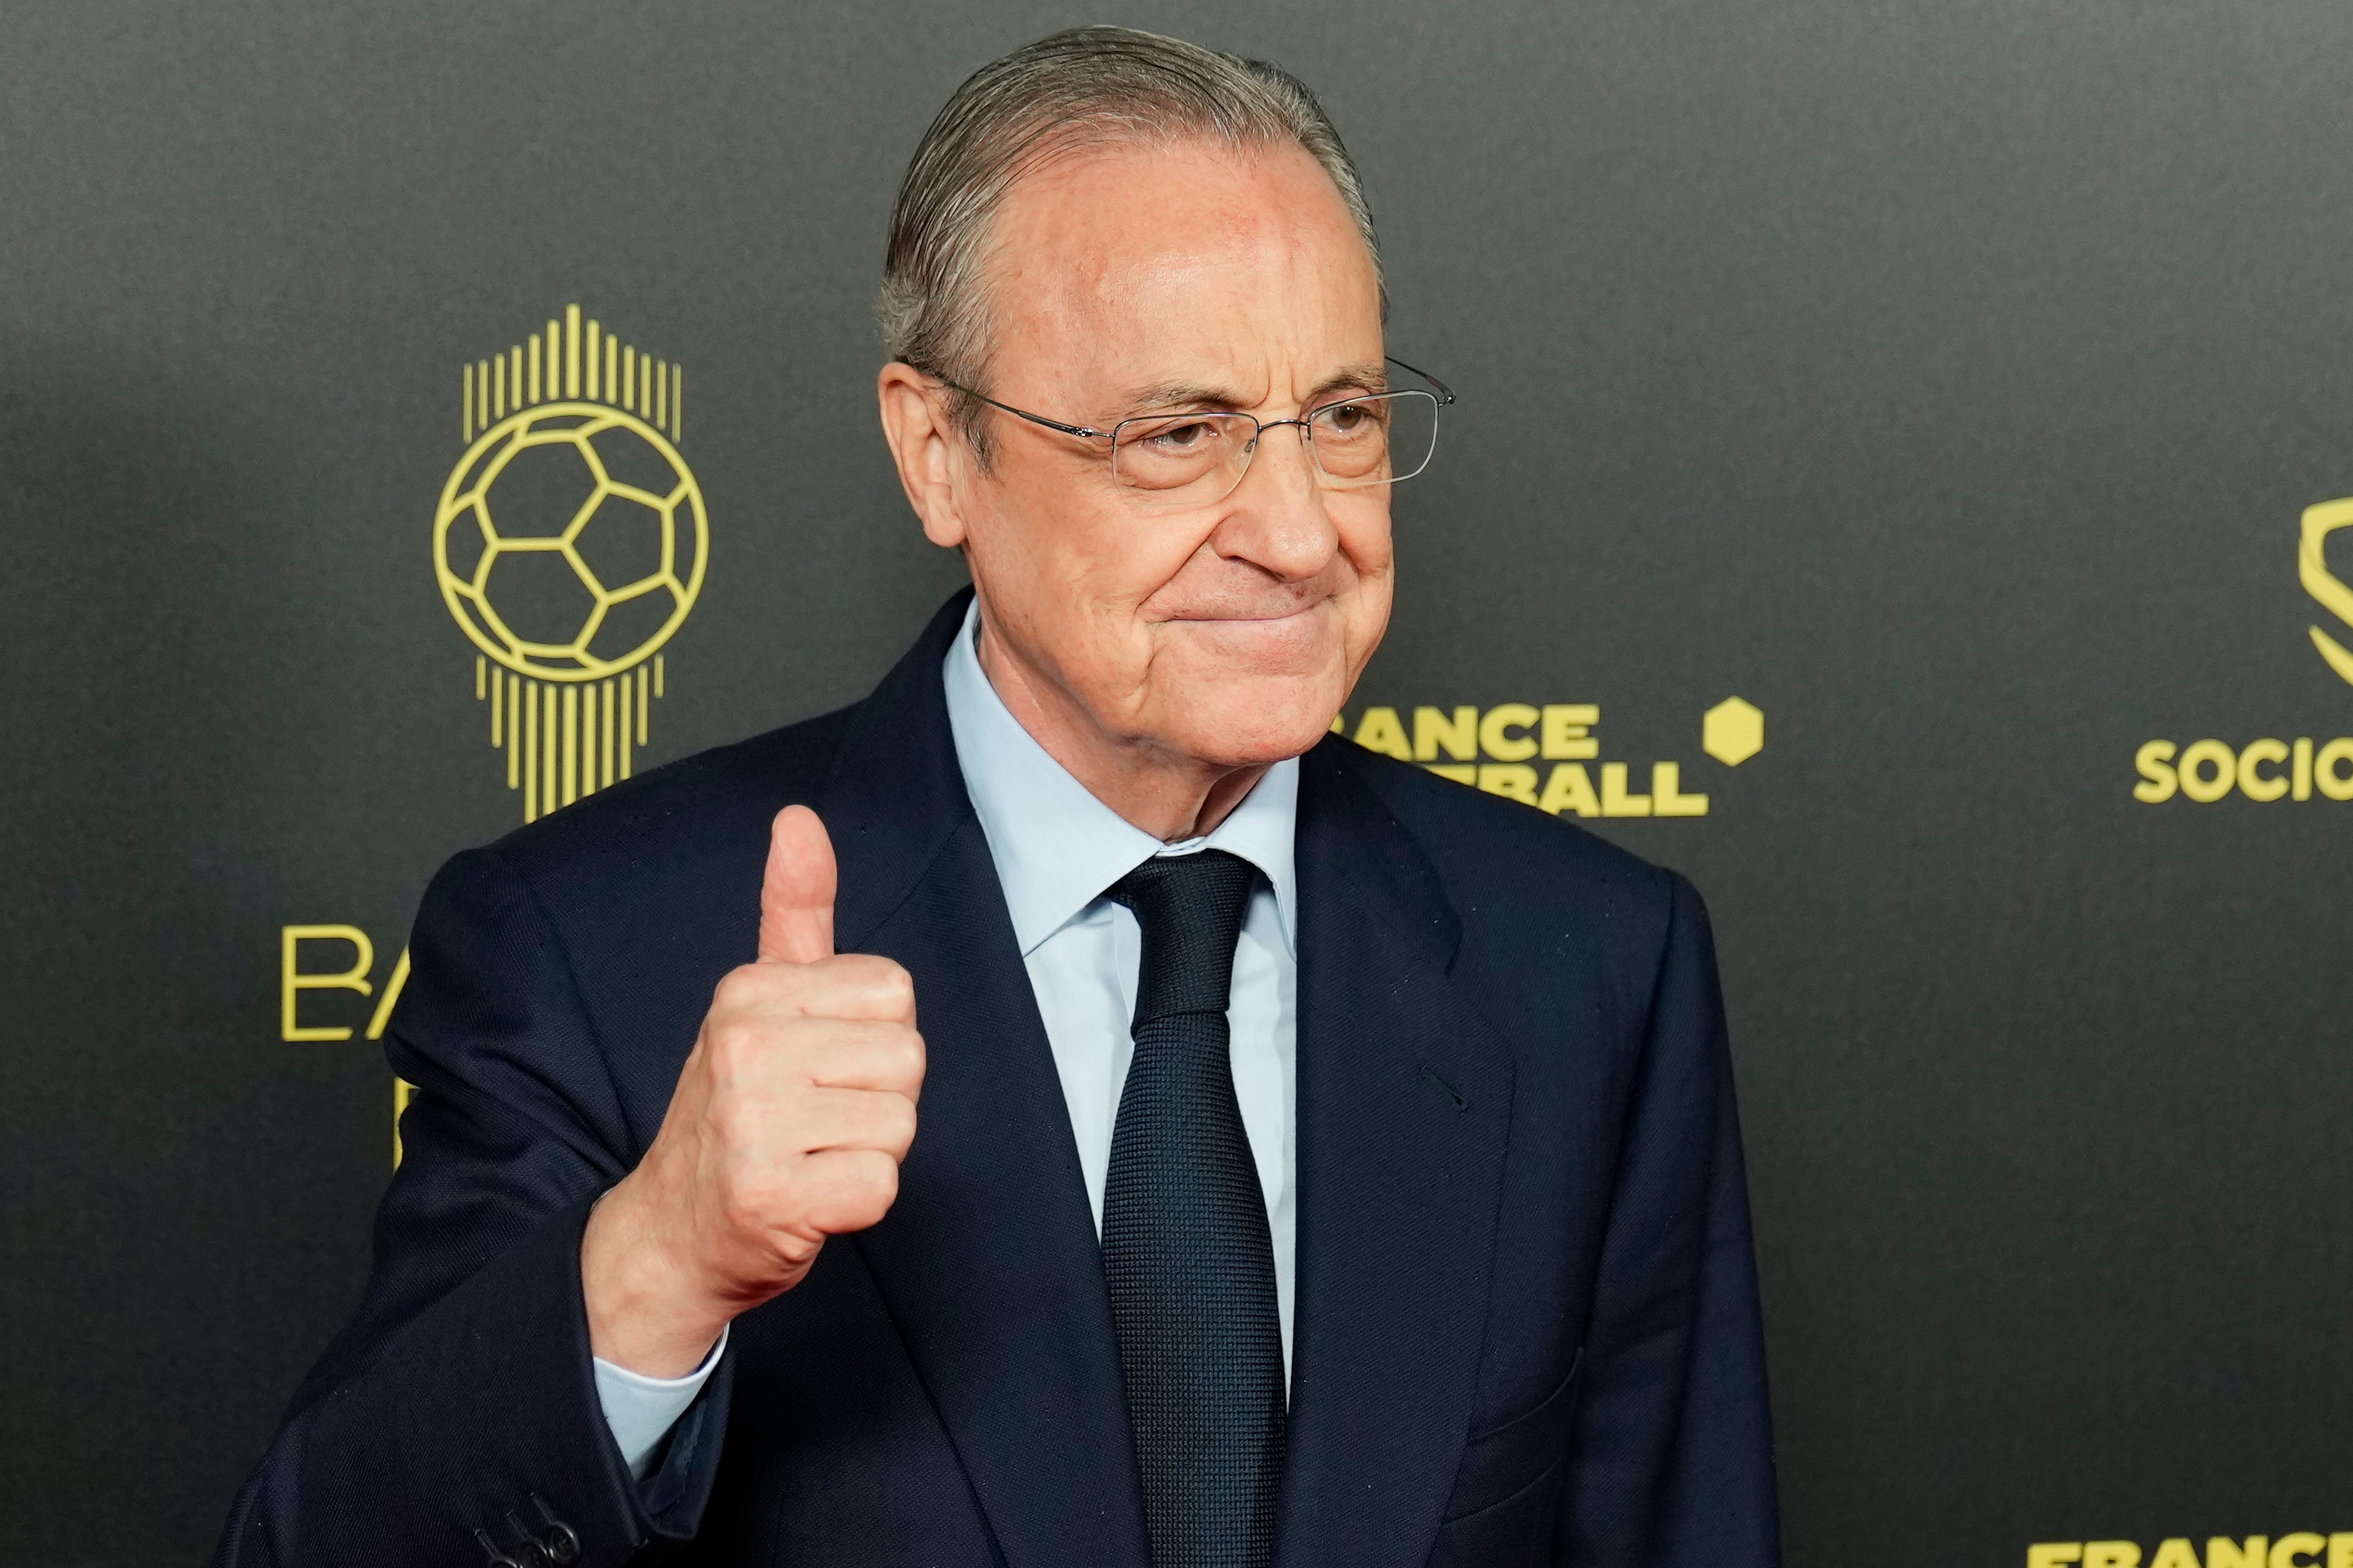 Florentino Perez has been pushing to form a new Super League